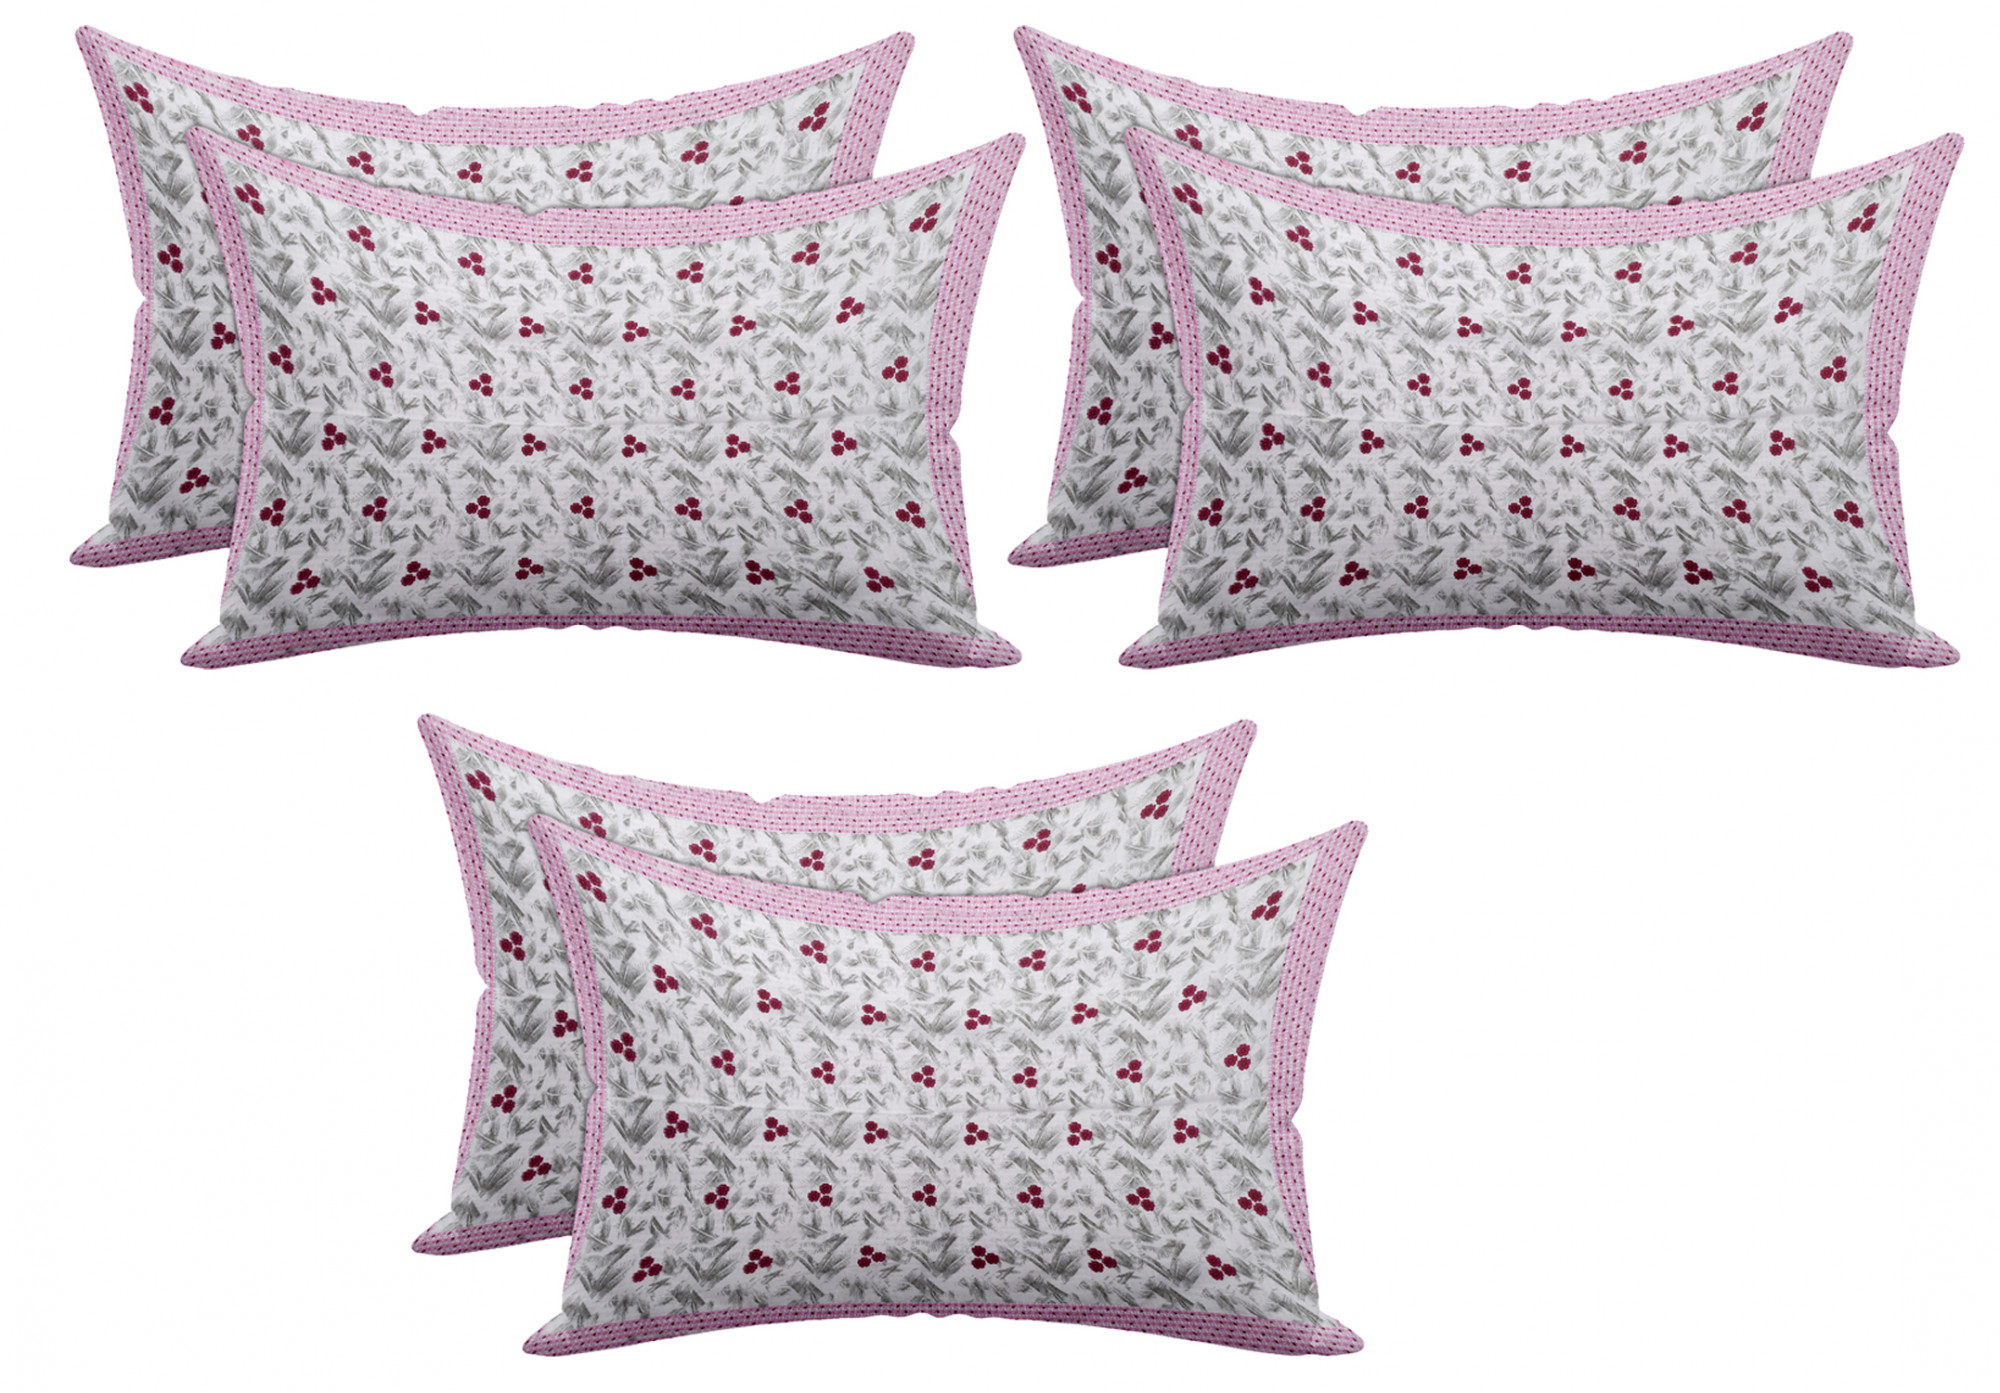 Kuber Industries Floral Design Premium Cotton Pillow Covers, 18 x 28 inch,(Pink)